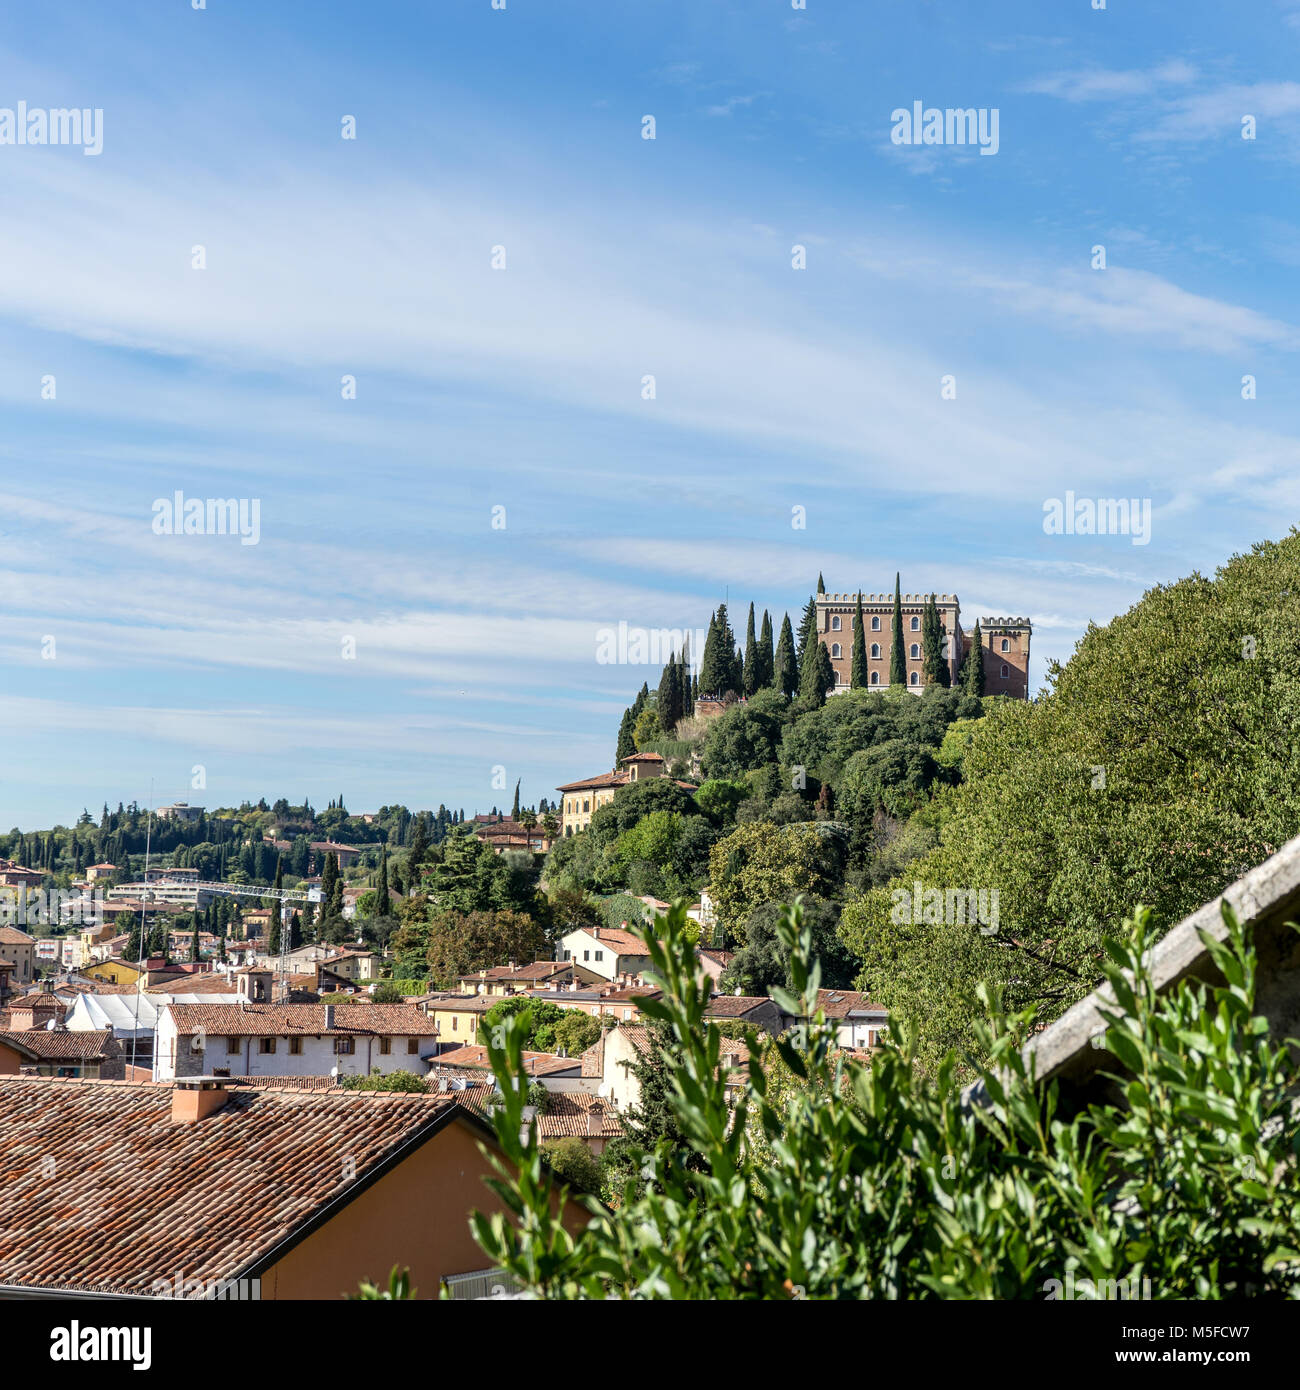 View of a the Castel San Pietro in Verona in Italy Stock Photo